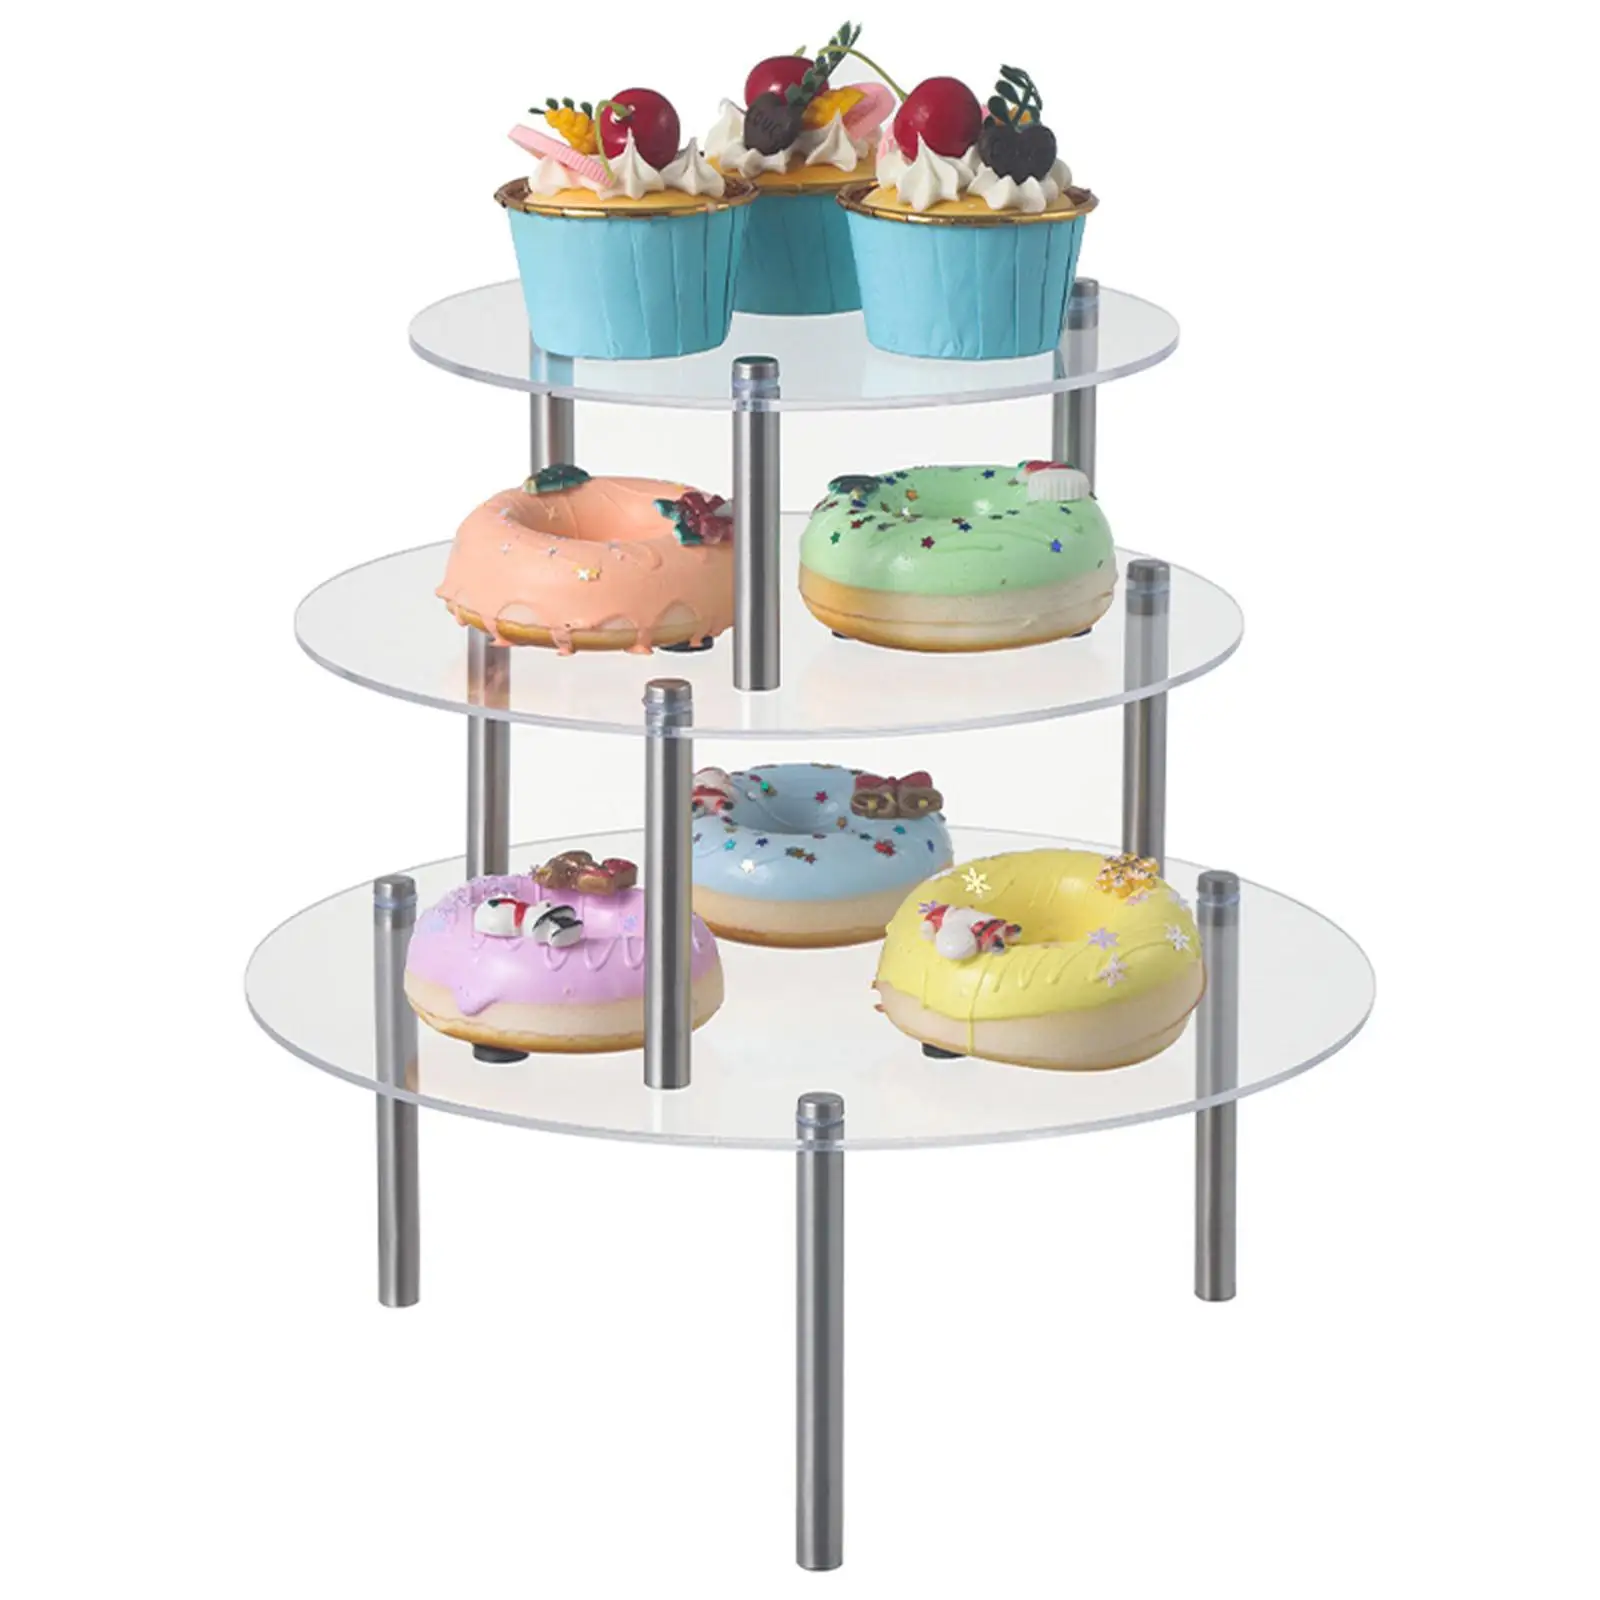 3 Tier Acrylic Cake Stand Dessert Rack Transparent Cupcake Holder Stand for Cosmetic Anniversary Perfume Table Figurines